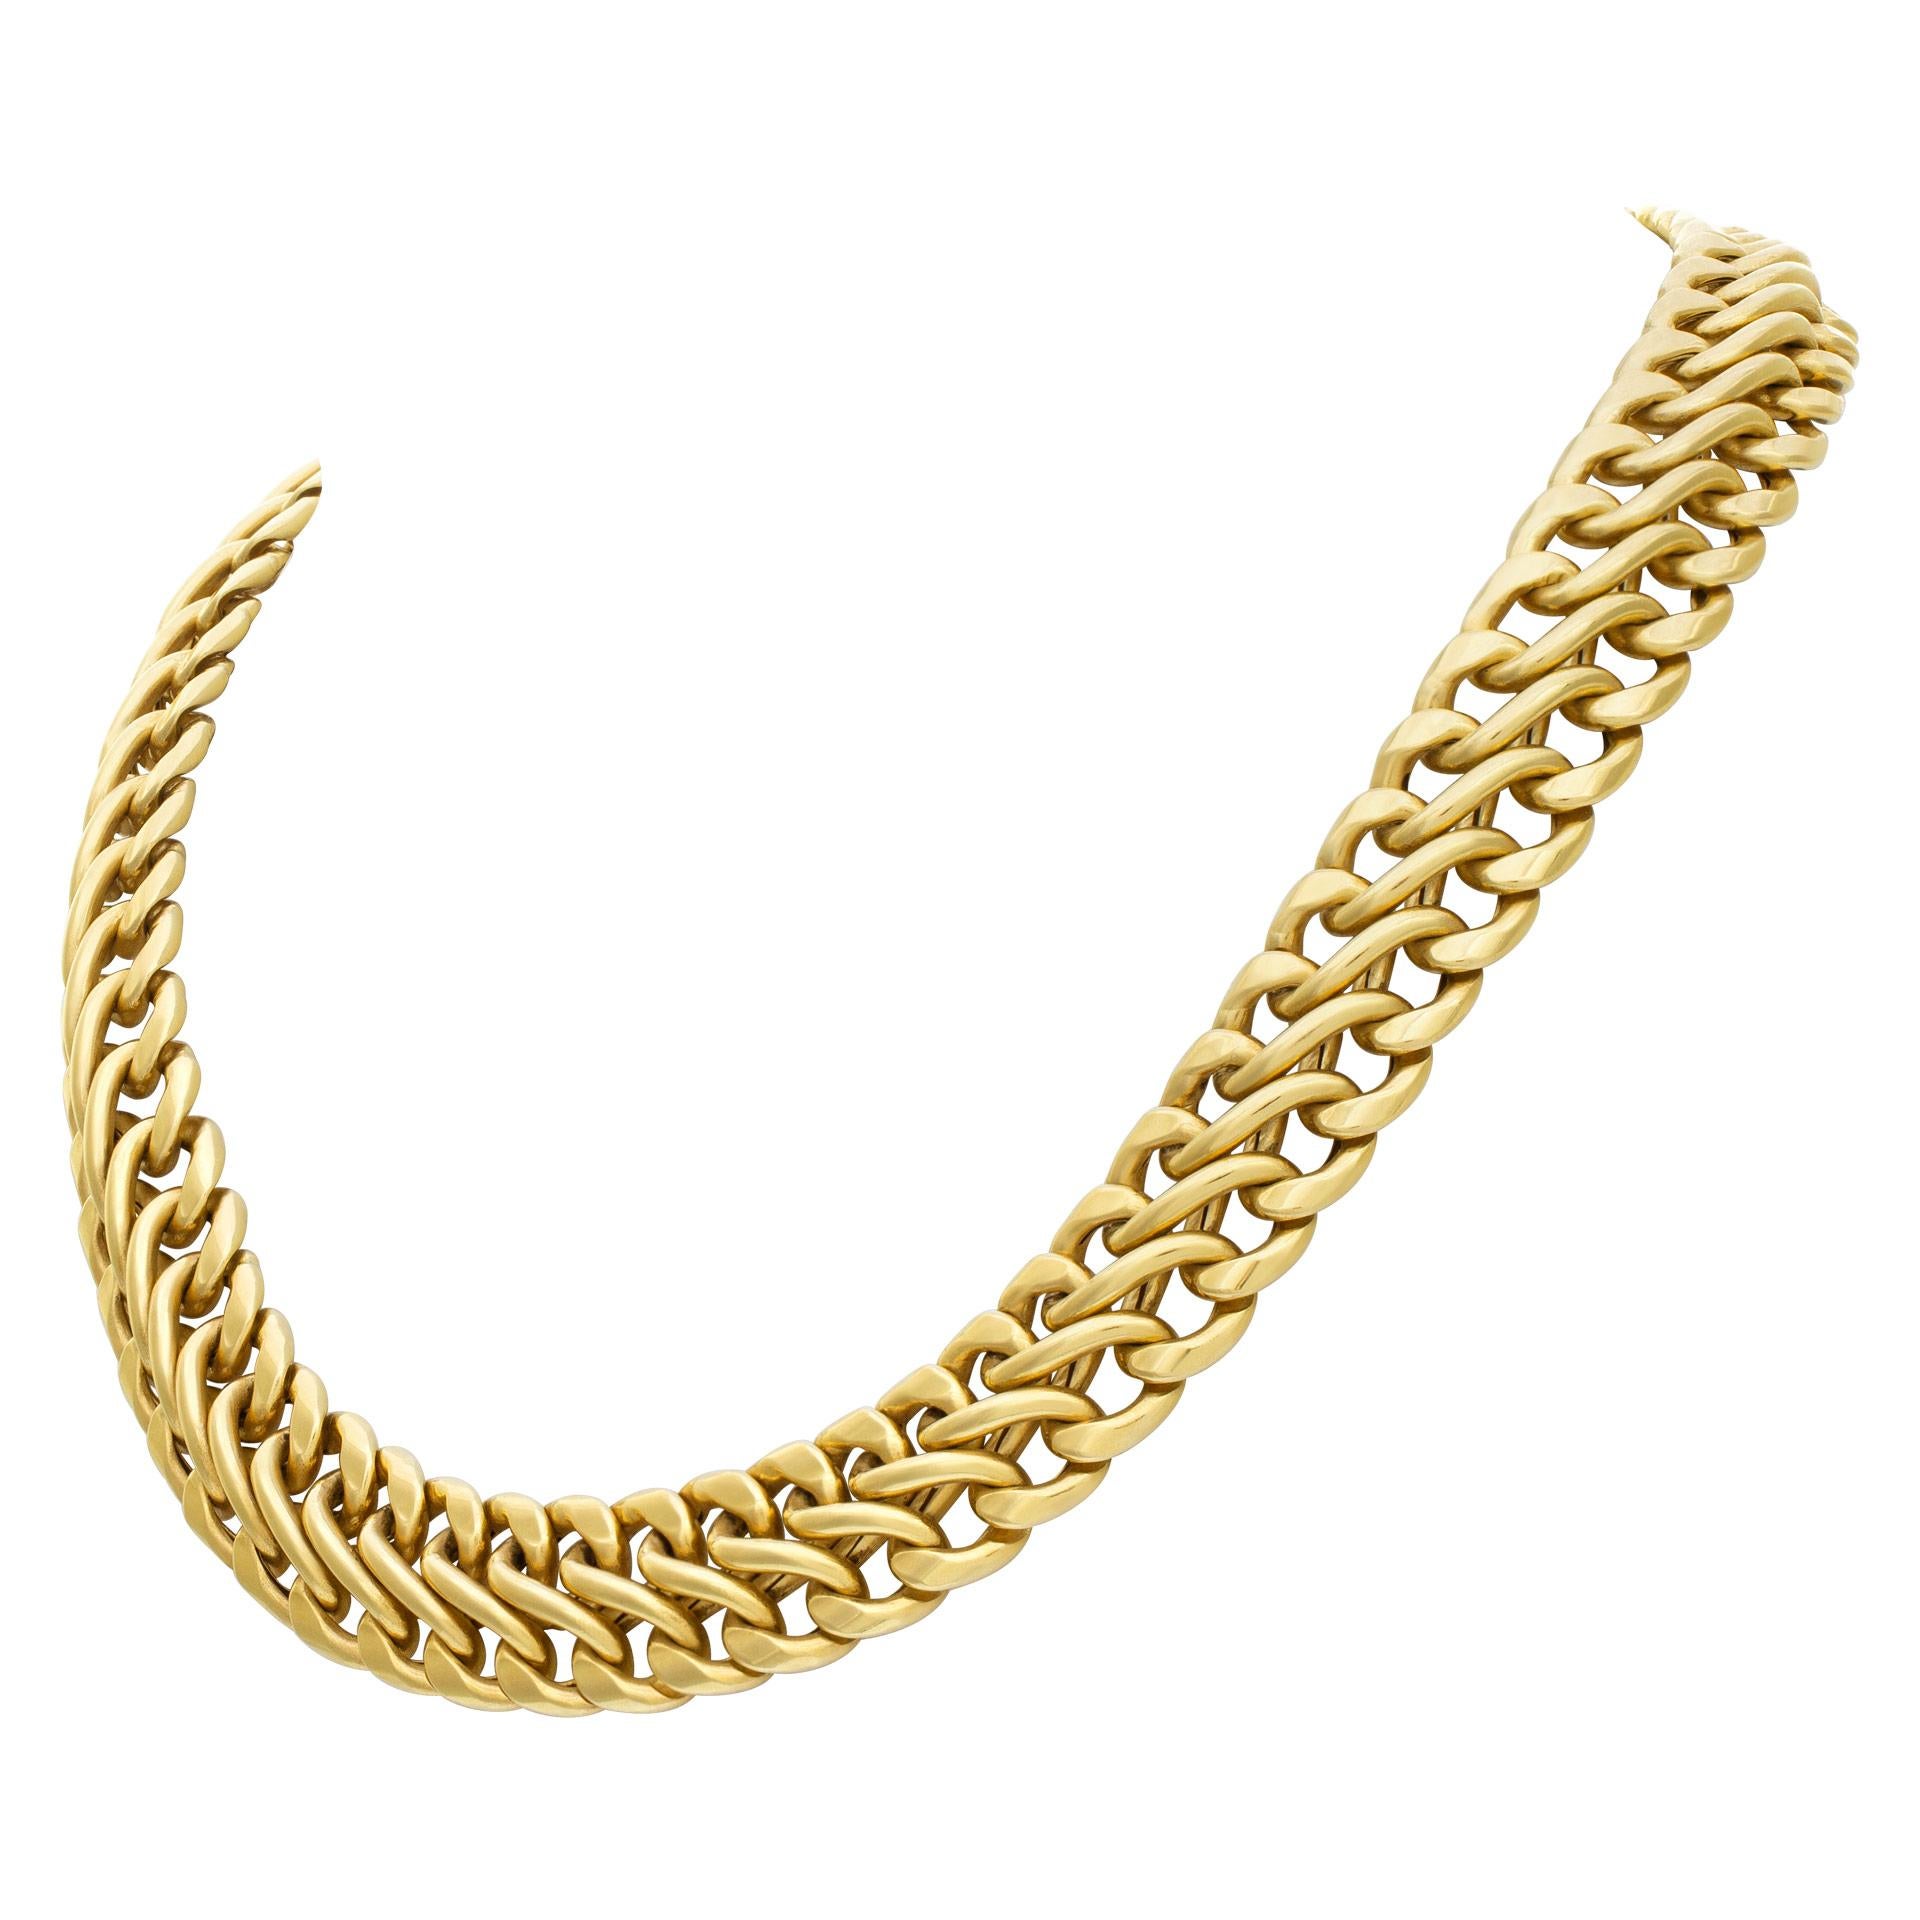 Gorgeous solid 18k yellow gold 16